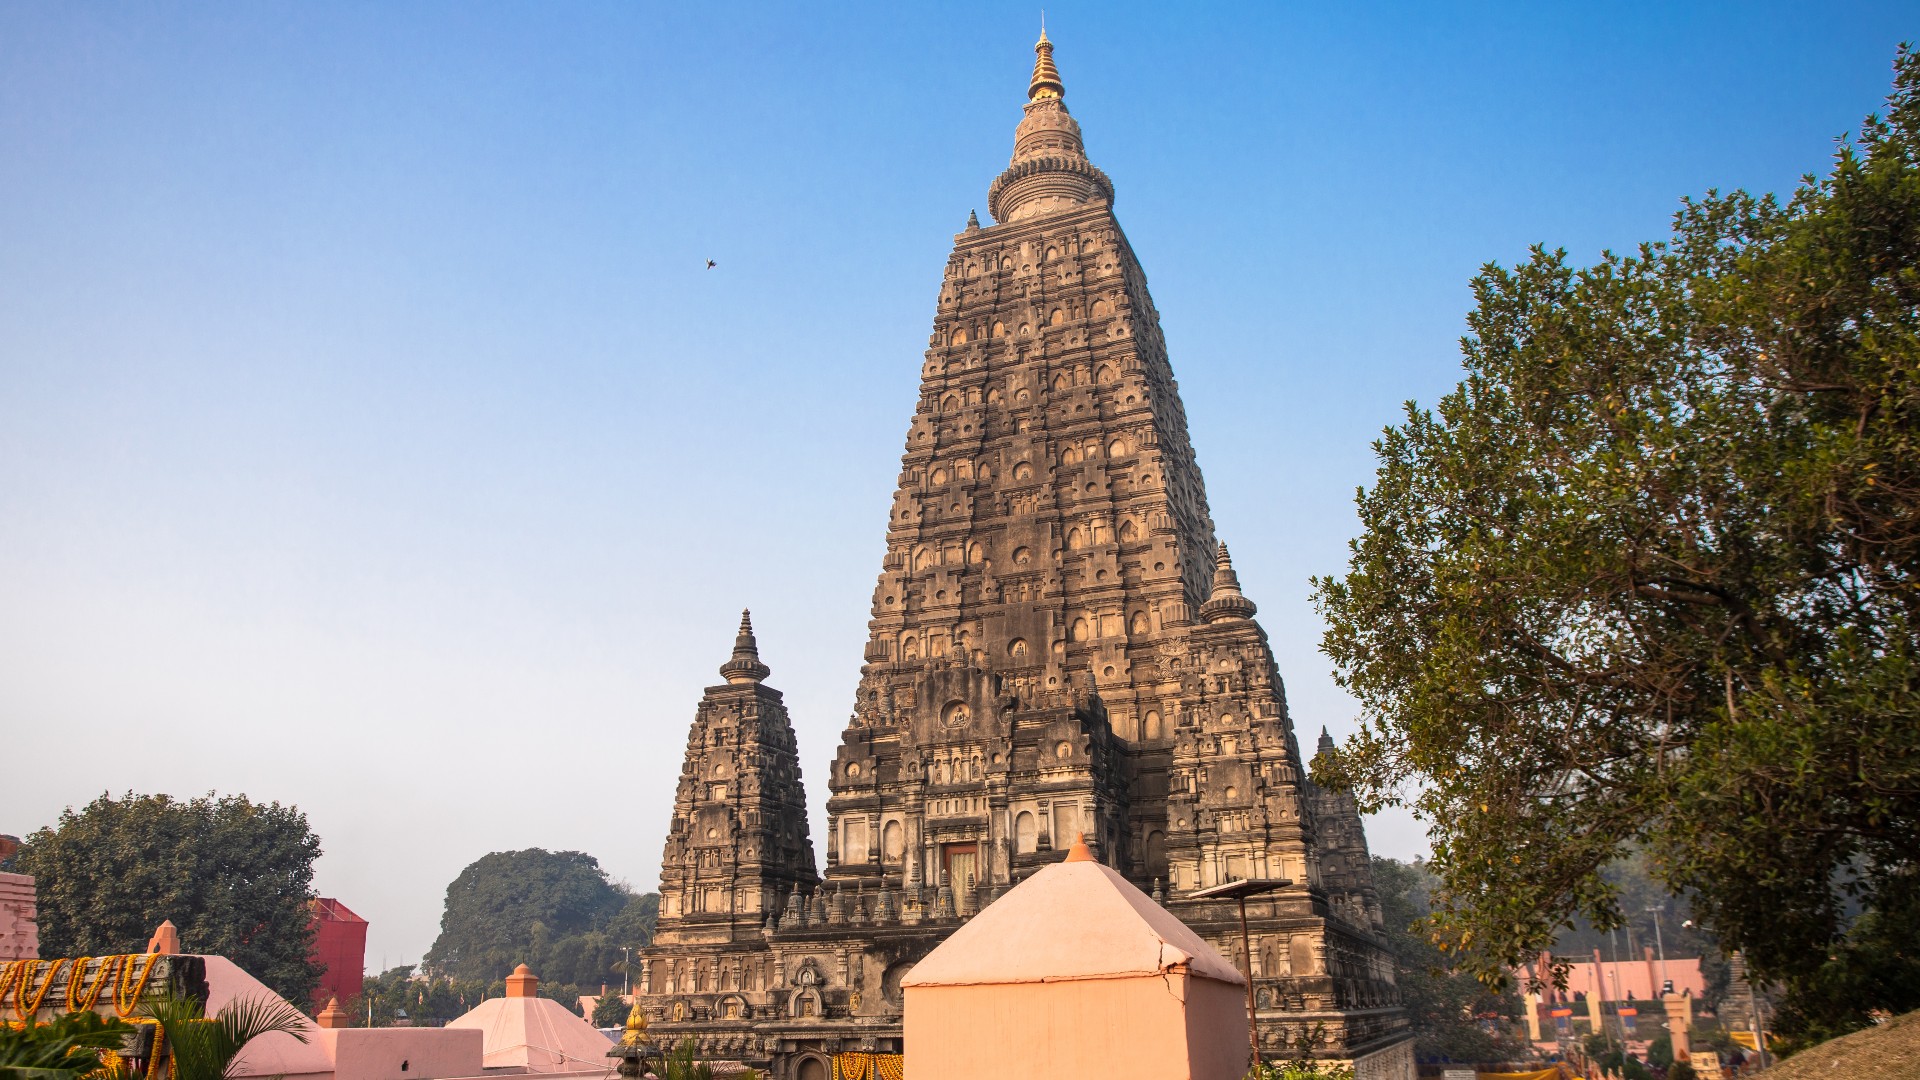 The stupa at Mahabodhi Temple Complex in Bodh Gaya, India. It is a UNESCO World Heritage Site.